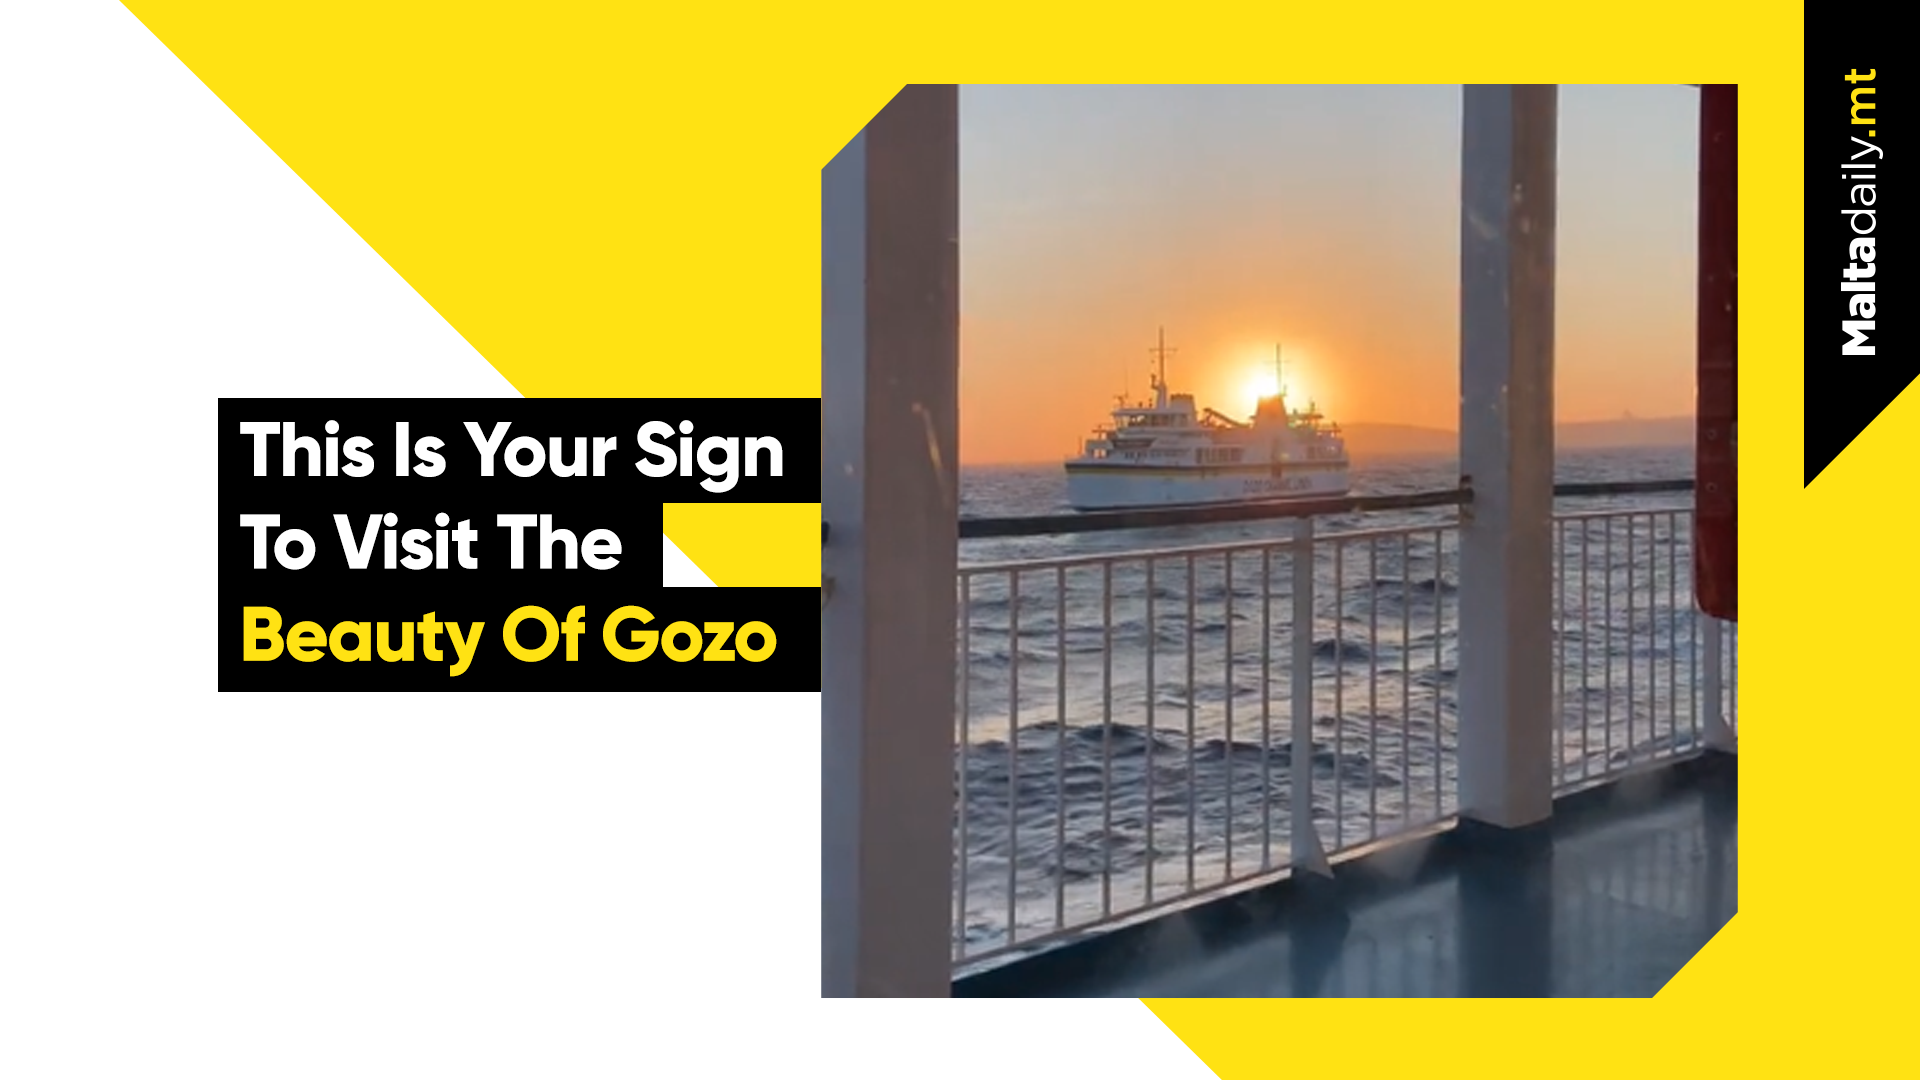 This Is Your Sign To Visit The Beauty Of Gozo